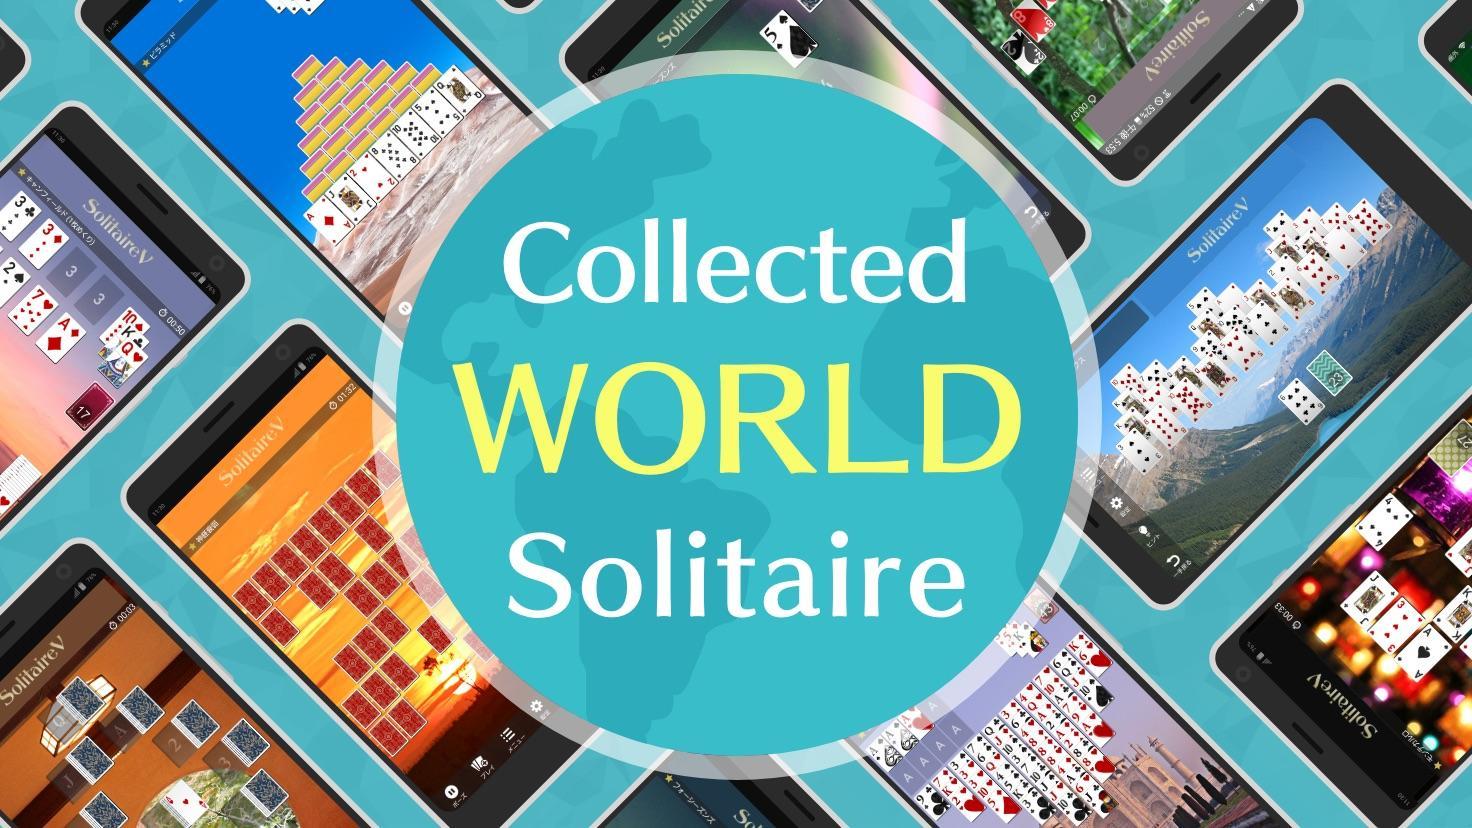 Solitaire Victory - 2020 Solitaire Collection 100 8.3.2 Screenshot 3